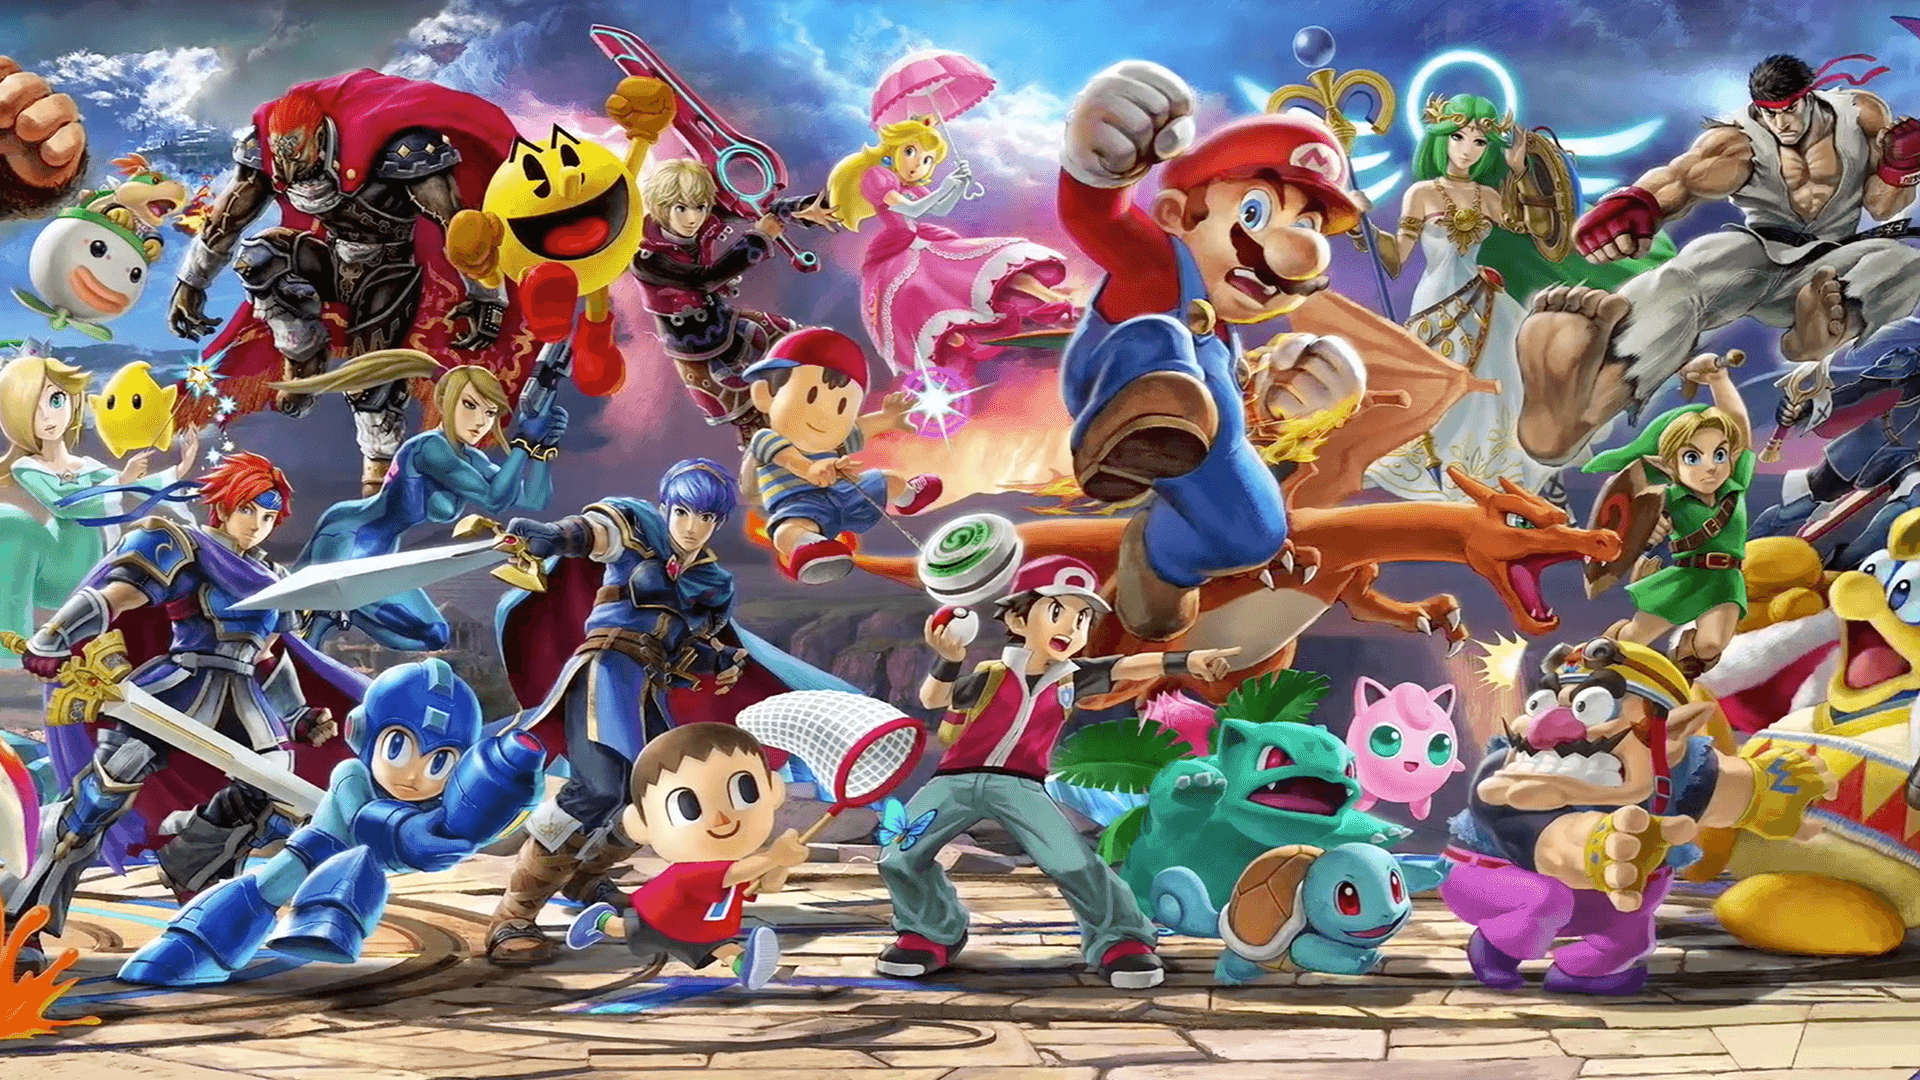 Music in Super Smash Bros. Ultimate detailed, over 800 tracks to be